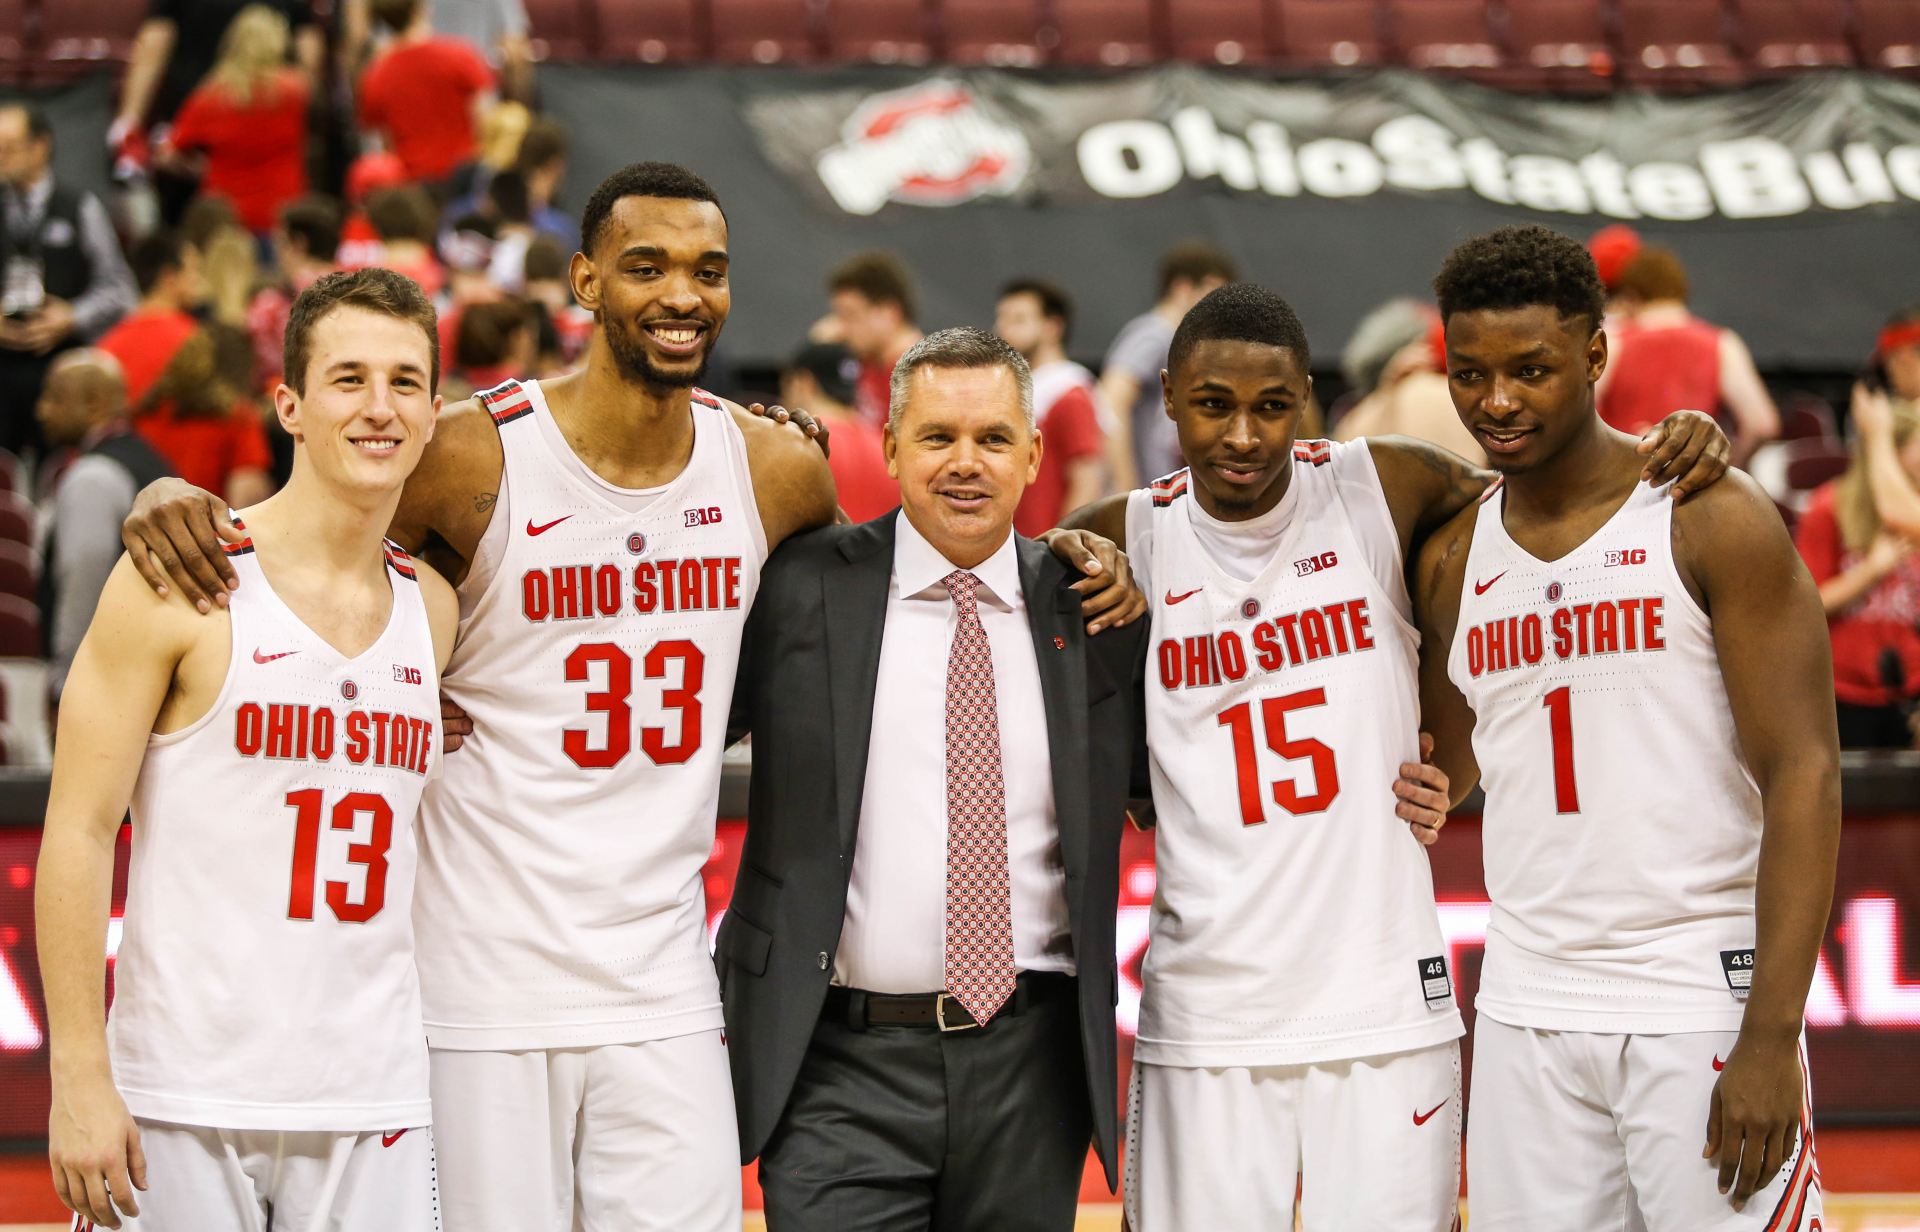 Men’s basketball Ohio State finishes second in Big Ten, earns No. 2